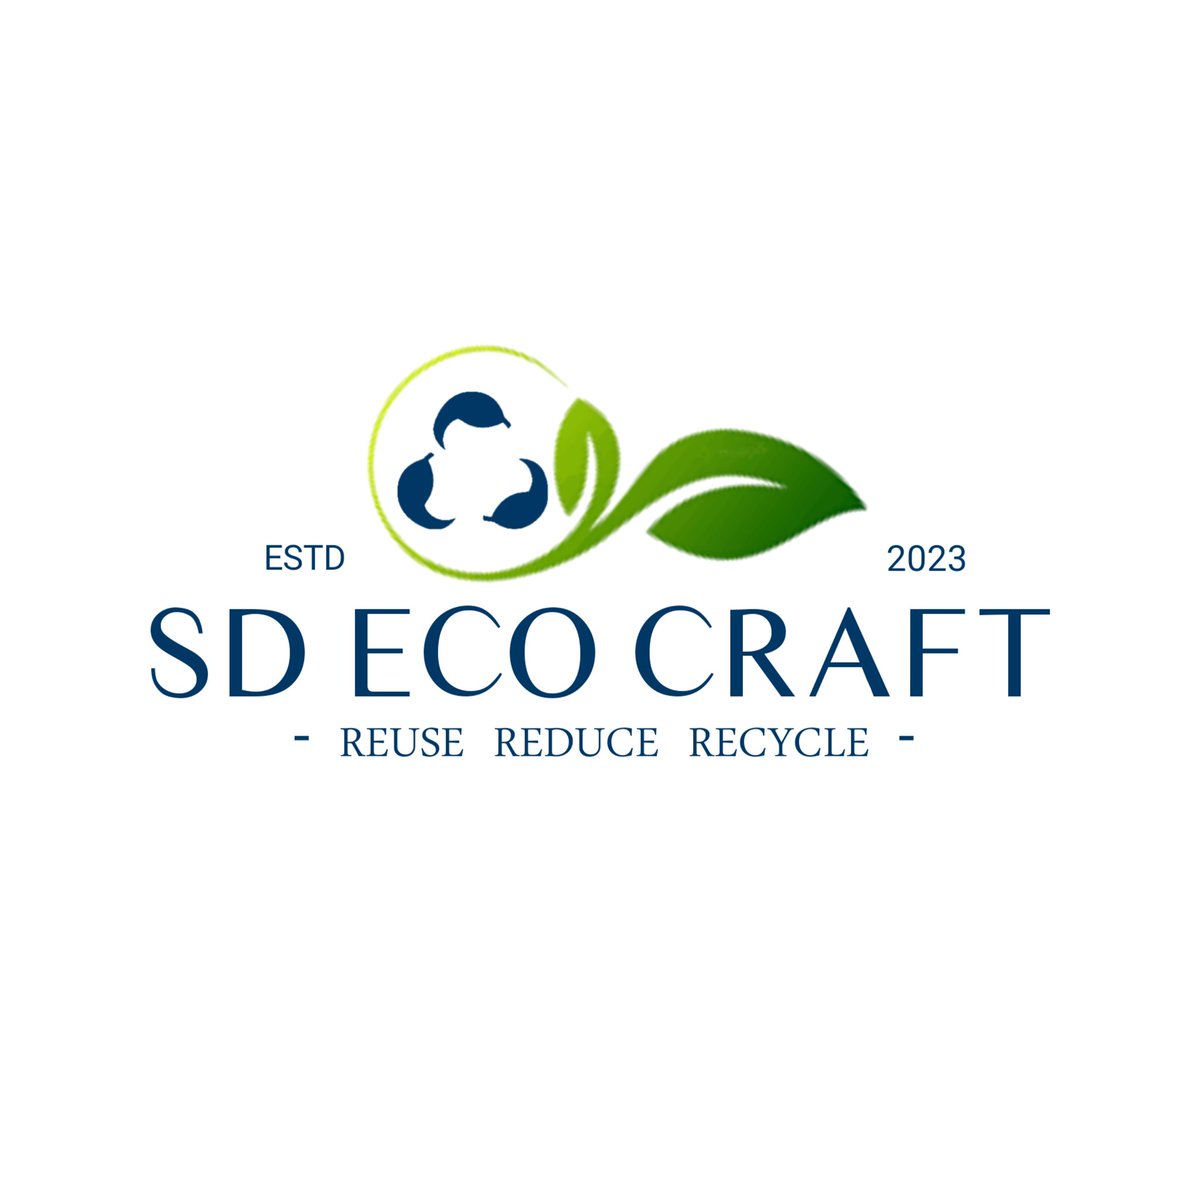 Unveiling of the recycling company's page. There we'll be posting our latest crafts, training, campaigns and SDG 12 ♻️ related stuffs.

link to the page;
instagram.com/sd_eco_craft/

#SDGs #SDGsAdvocate #LeadingChange #UnitedNations #SocialImpact #SustainableDevelopment #GlobalGoals